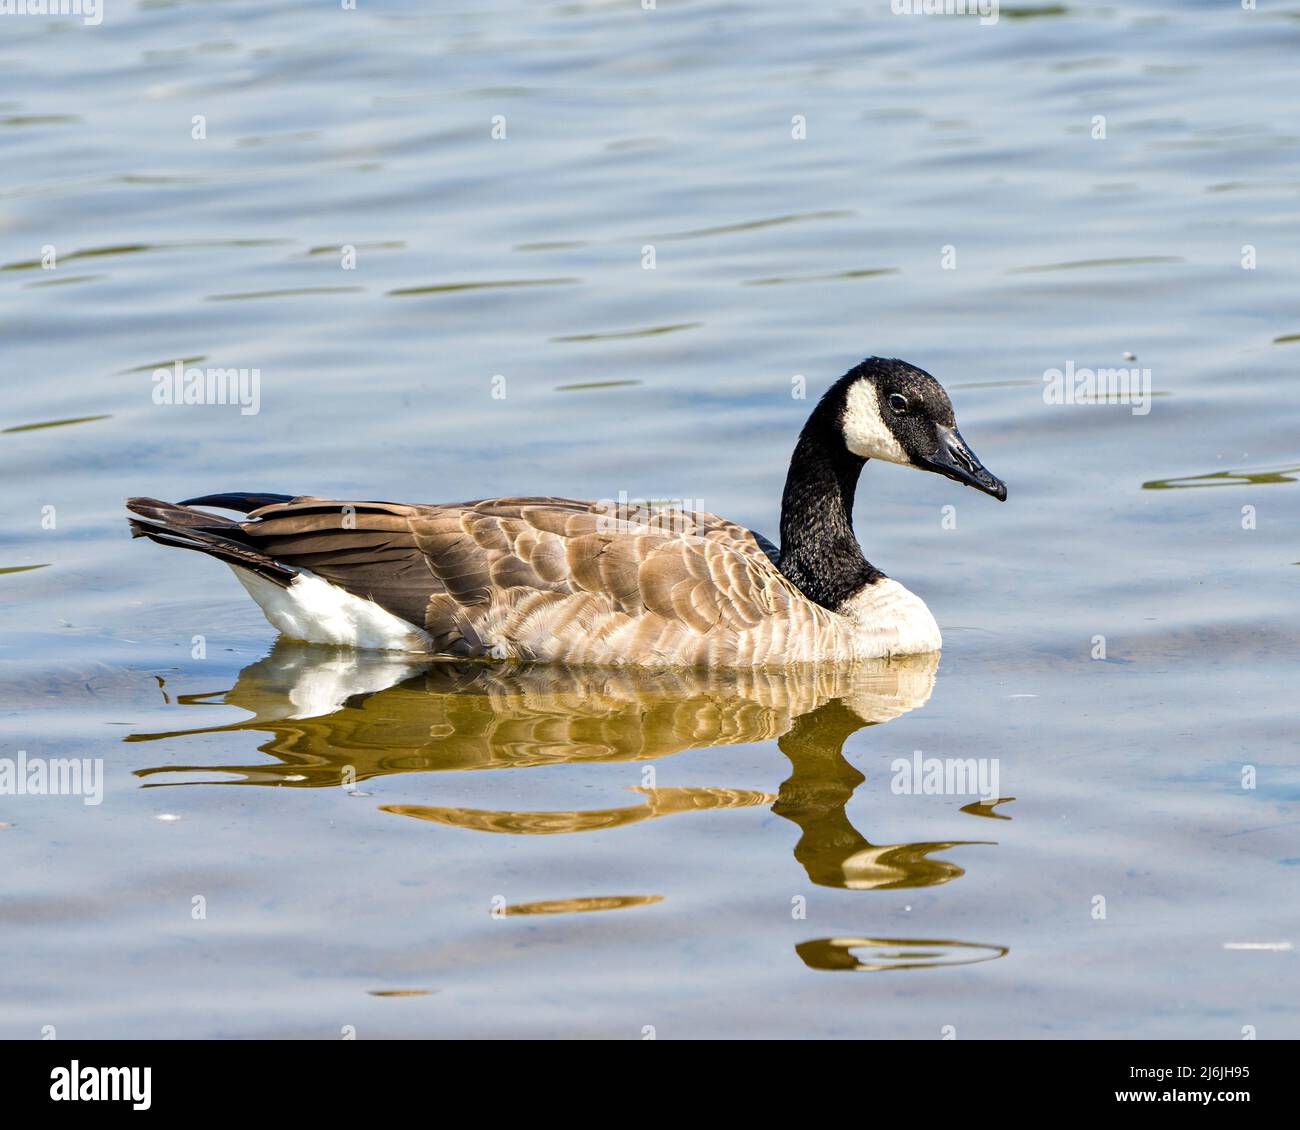 Canada Geese bird swimming in its environment and surrounding habitat, with blur water background in the summer season. Goose Image. Photo, Picture. Stock Photo